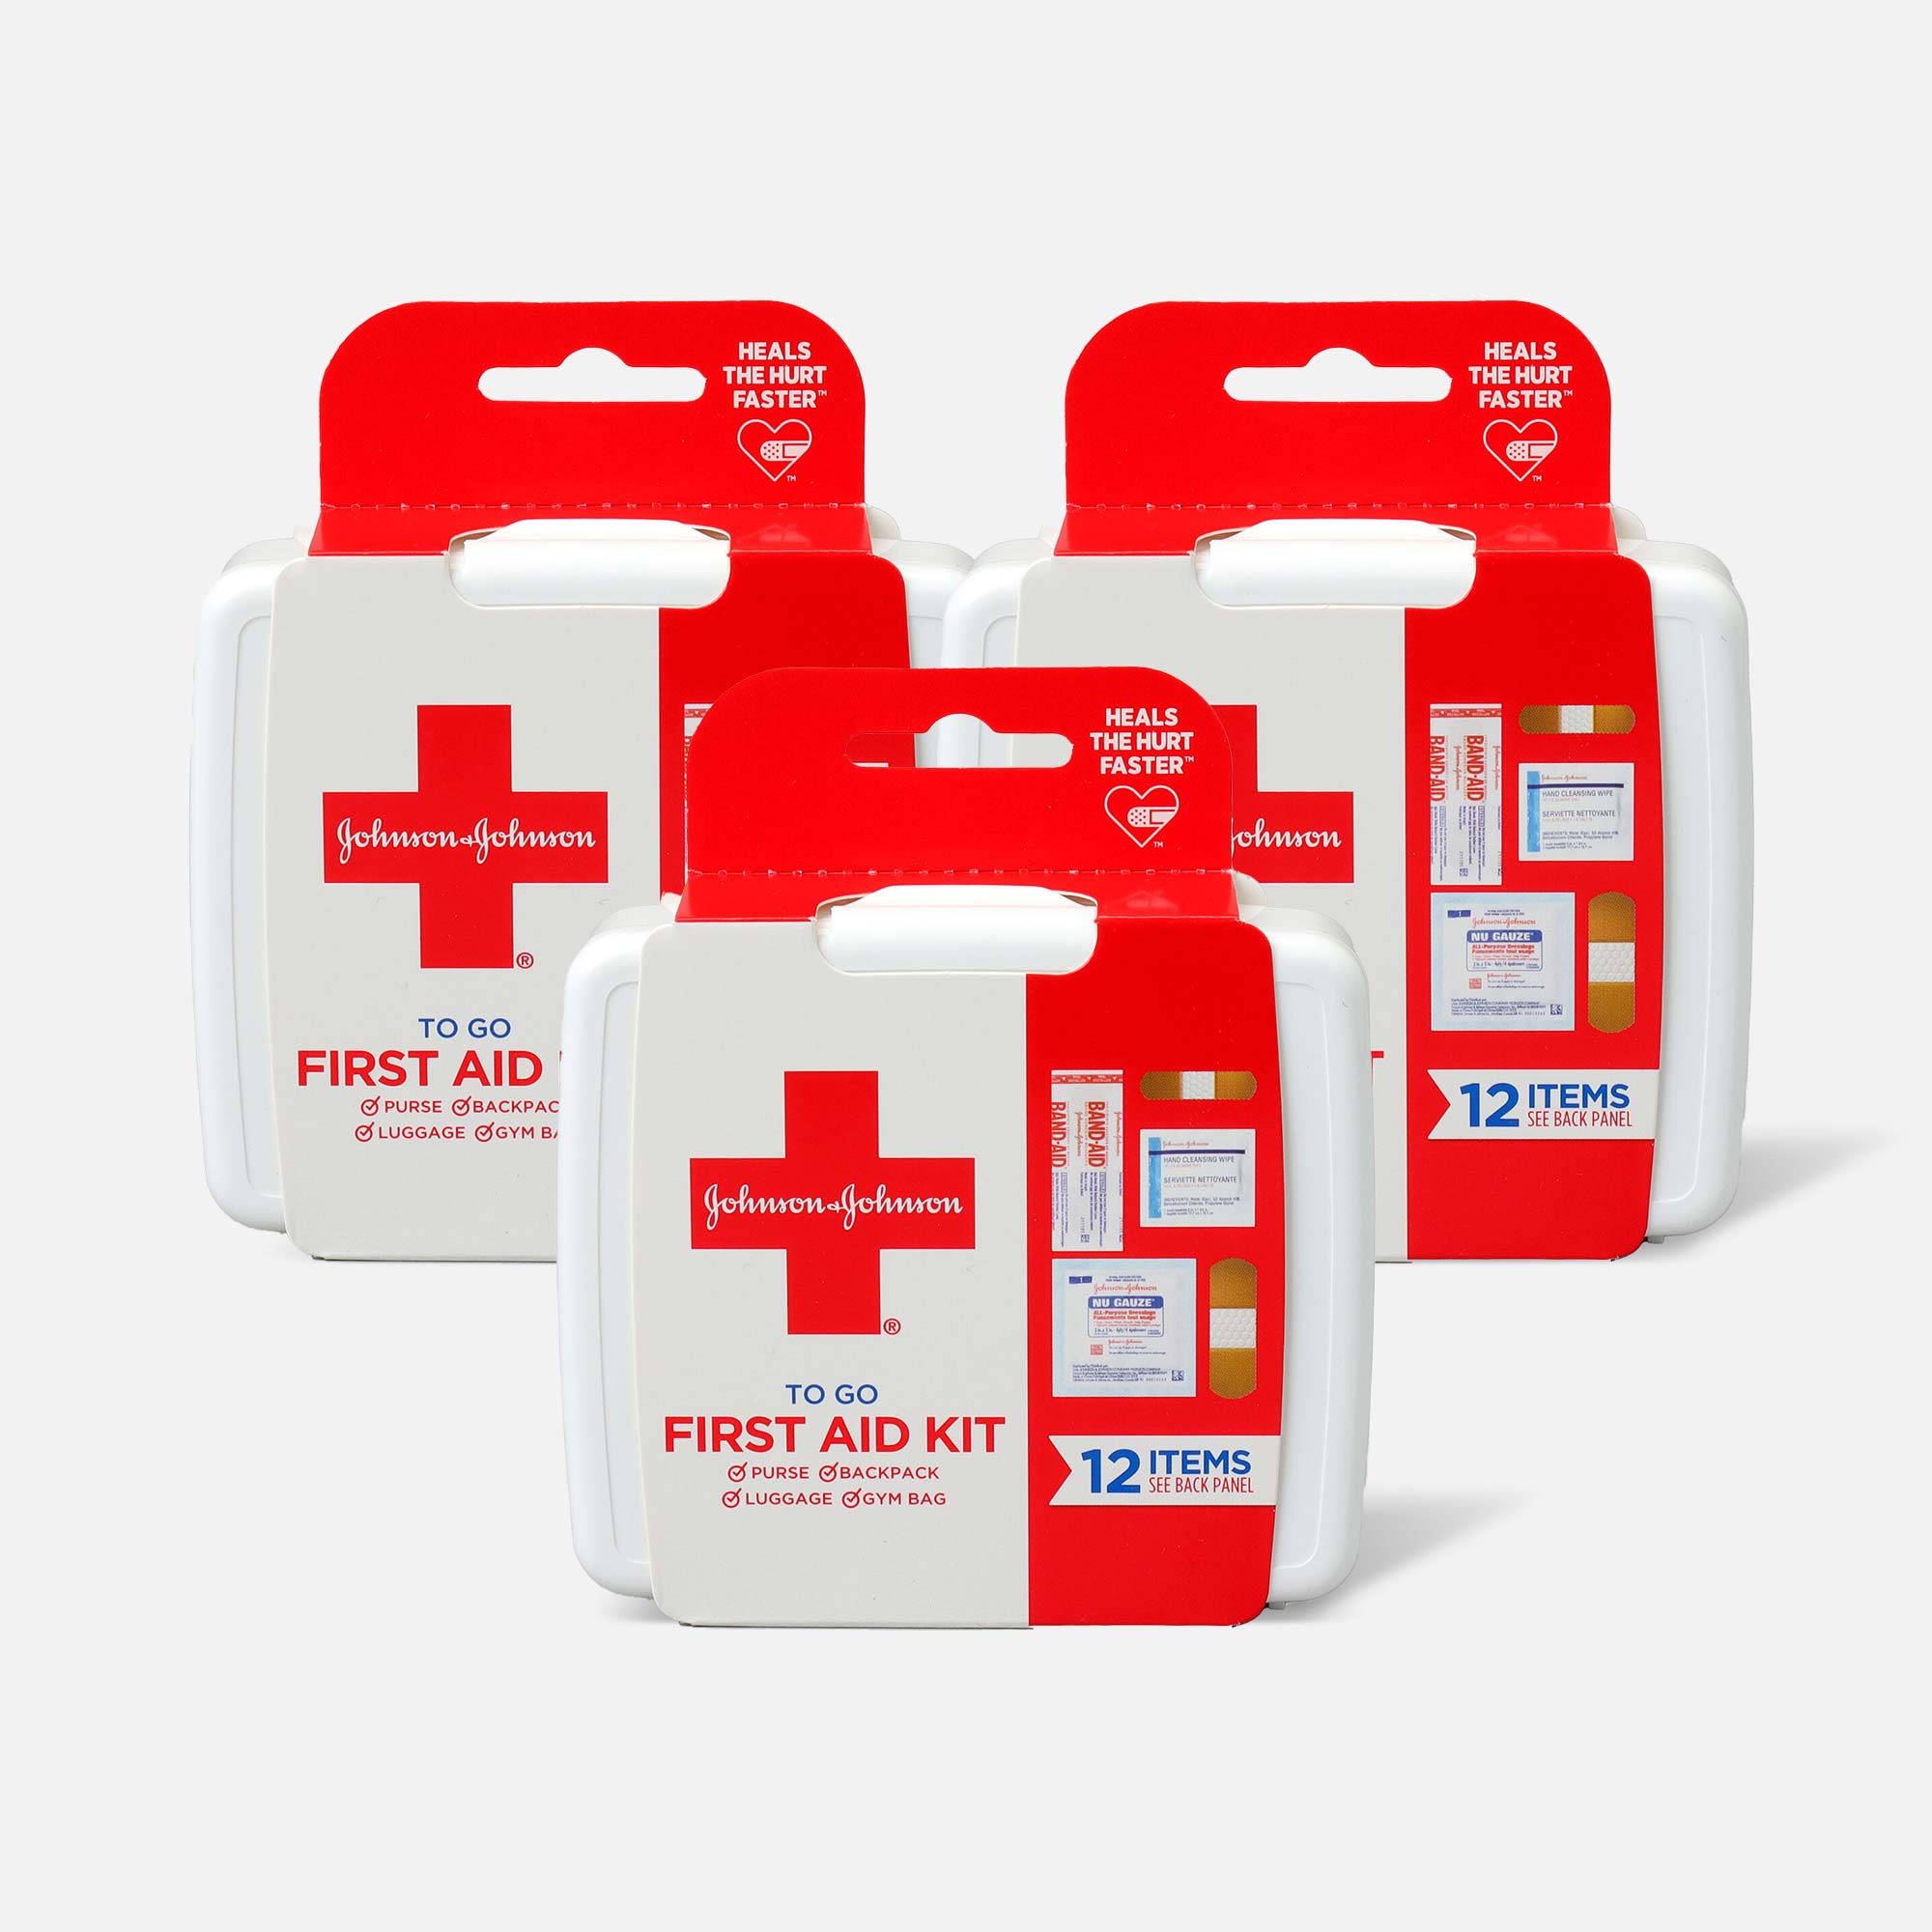 First Aid Travel Kit